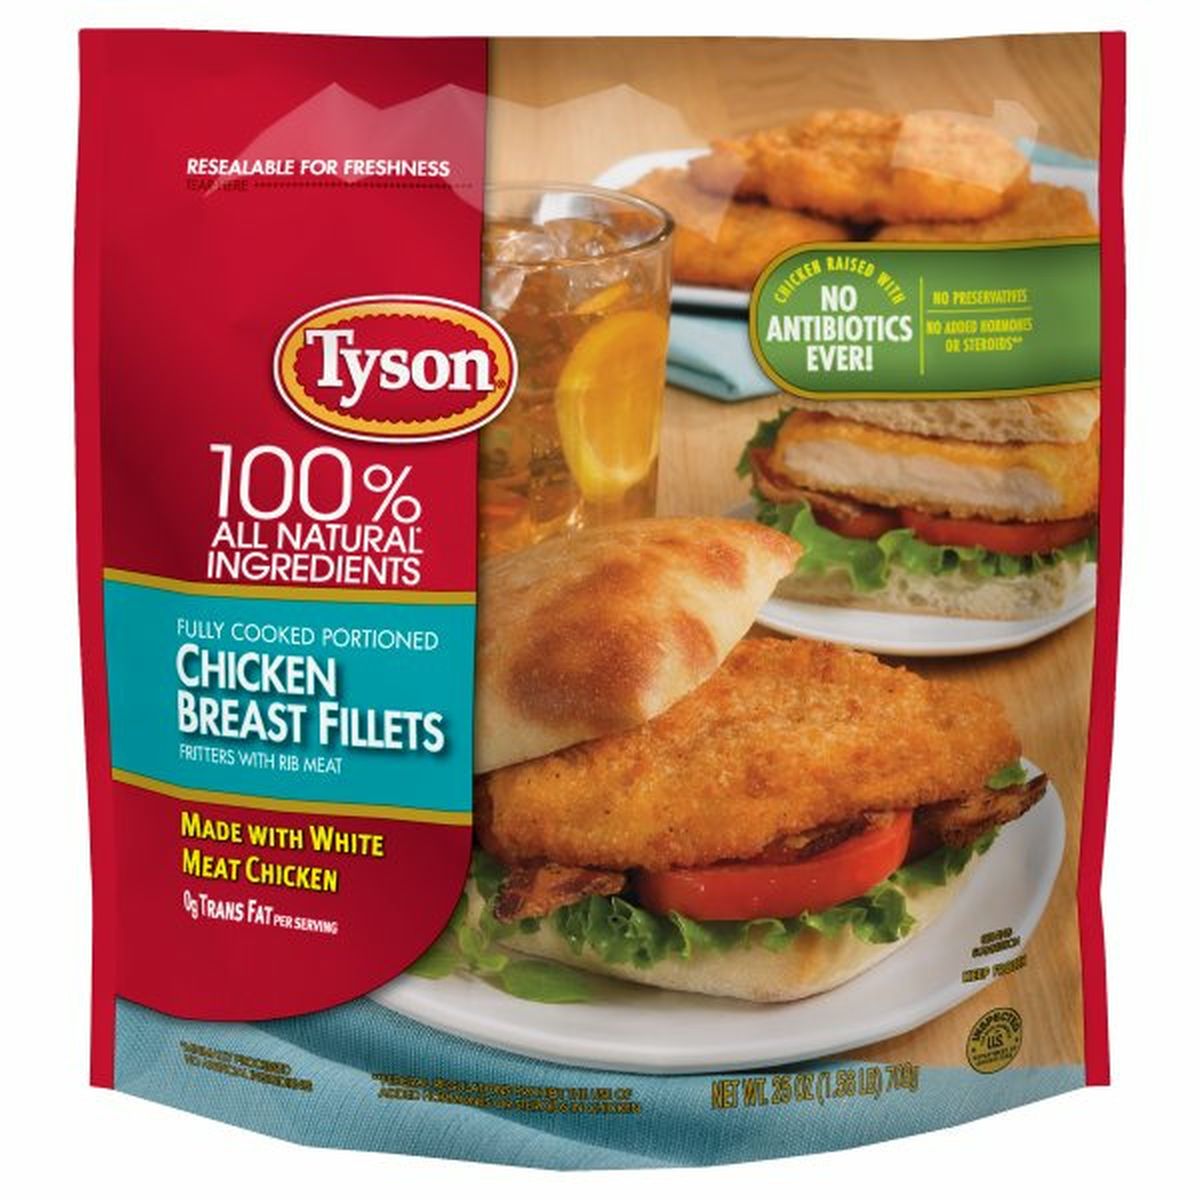 Calories in Tyson Fully Cooked Portioned Chicken Breast Fillets, 25 oz. (Frozen)